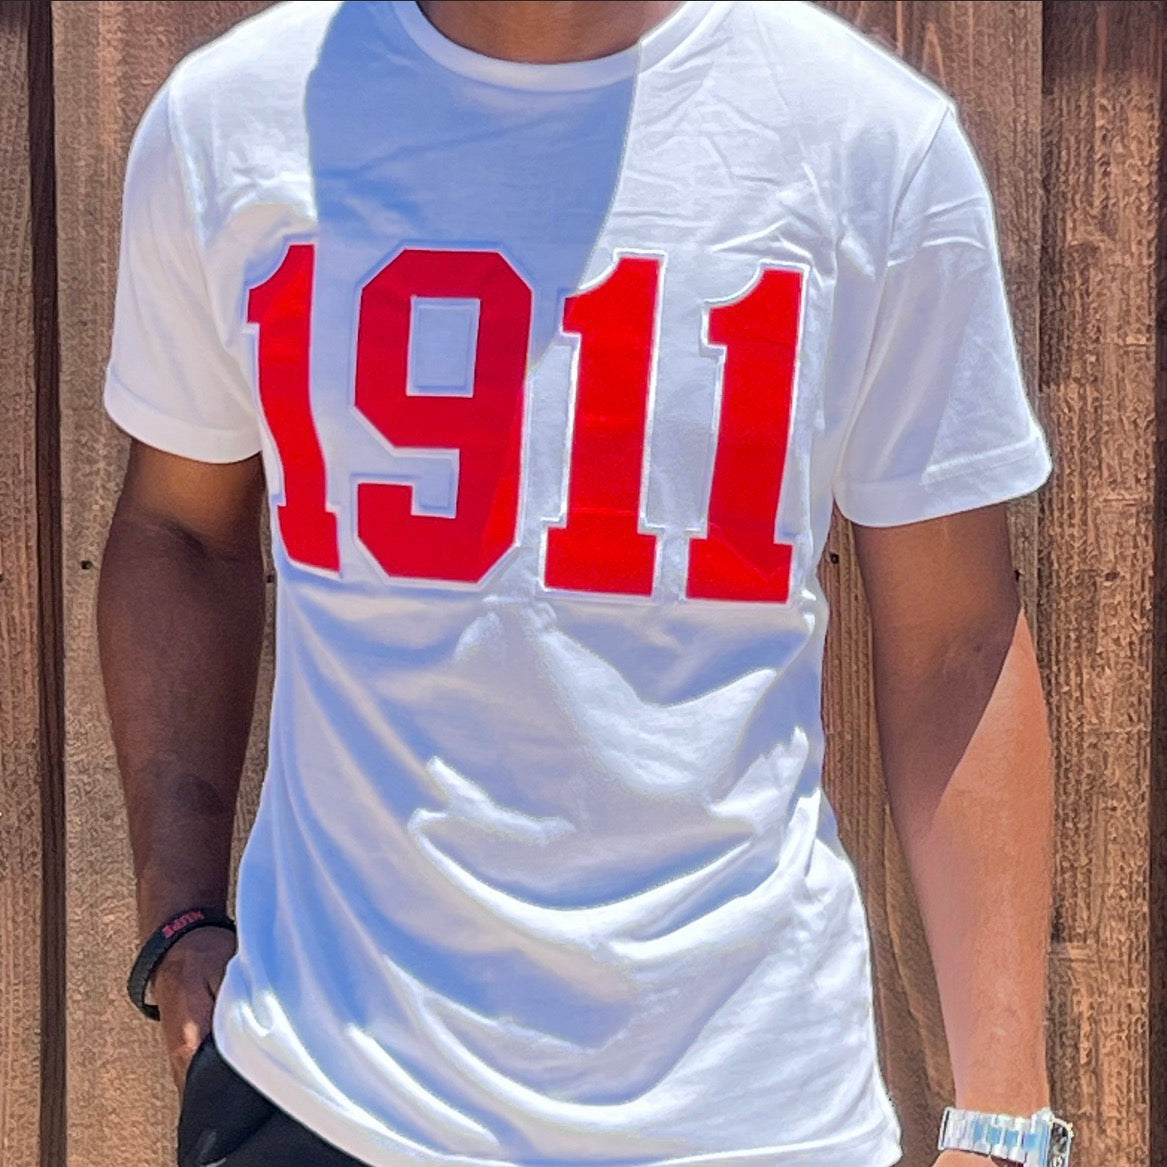 Embroidery 1911 T Nupekave White/ Shirt - – Psi Alpha Kappa Red